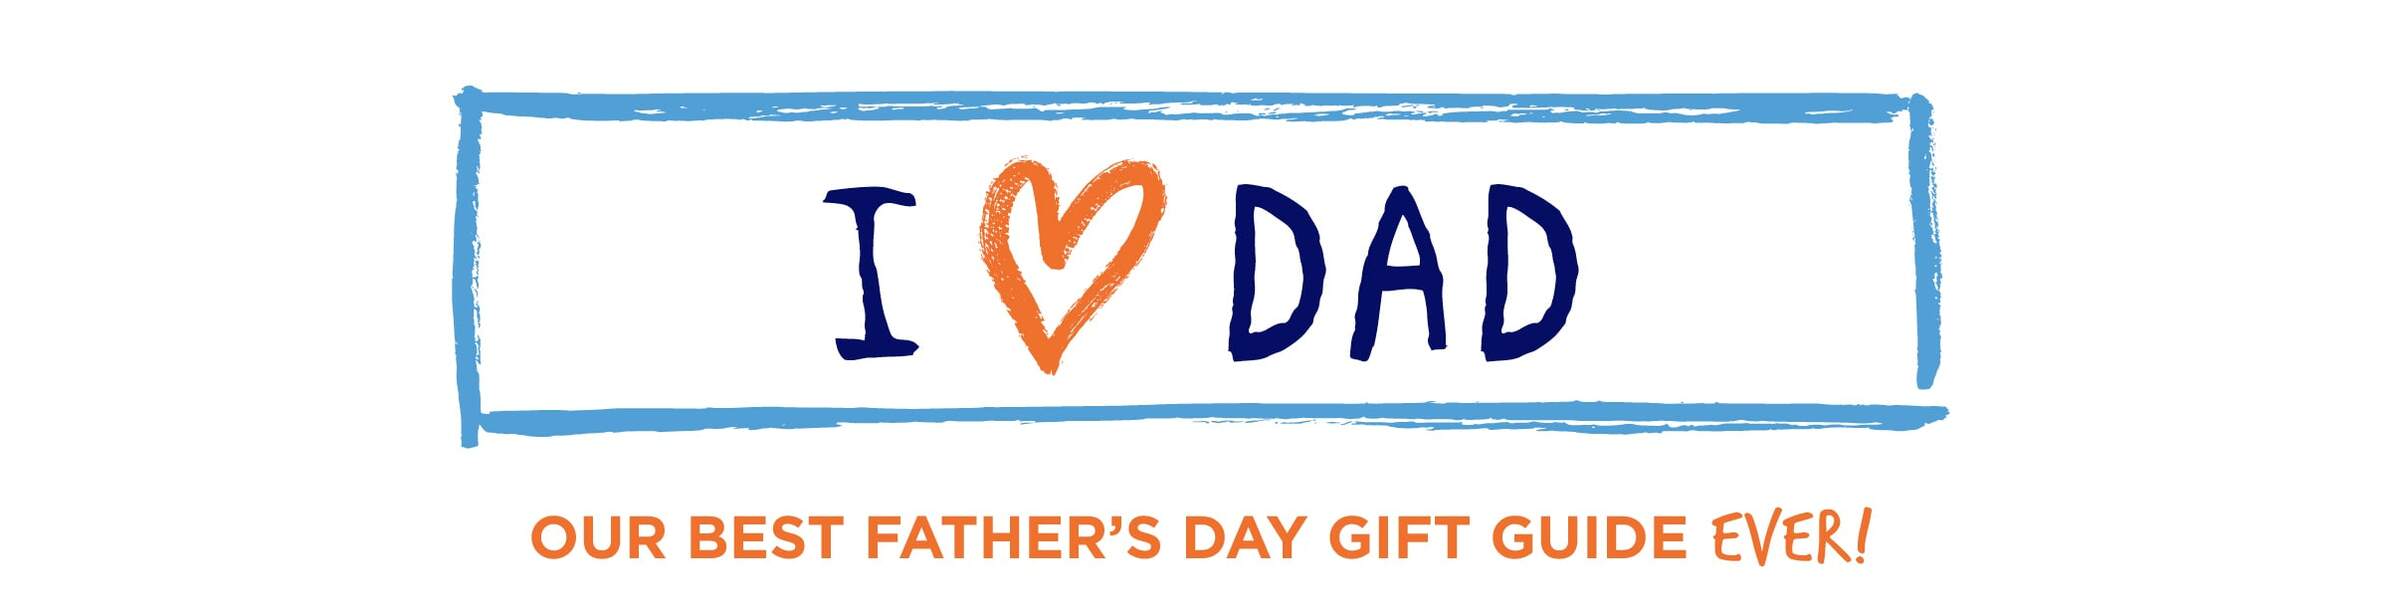 Shop our Best Father's Day Gift Guide Ever!